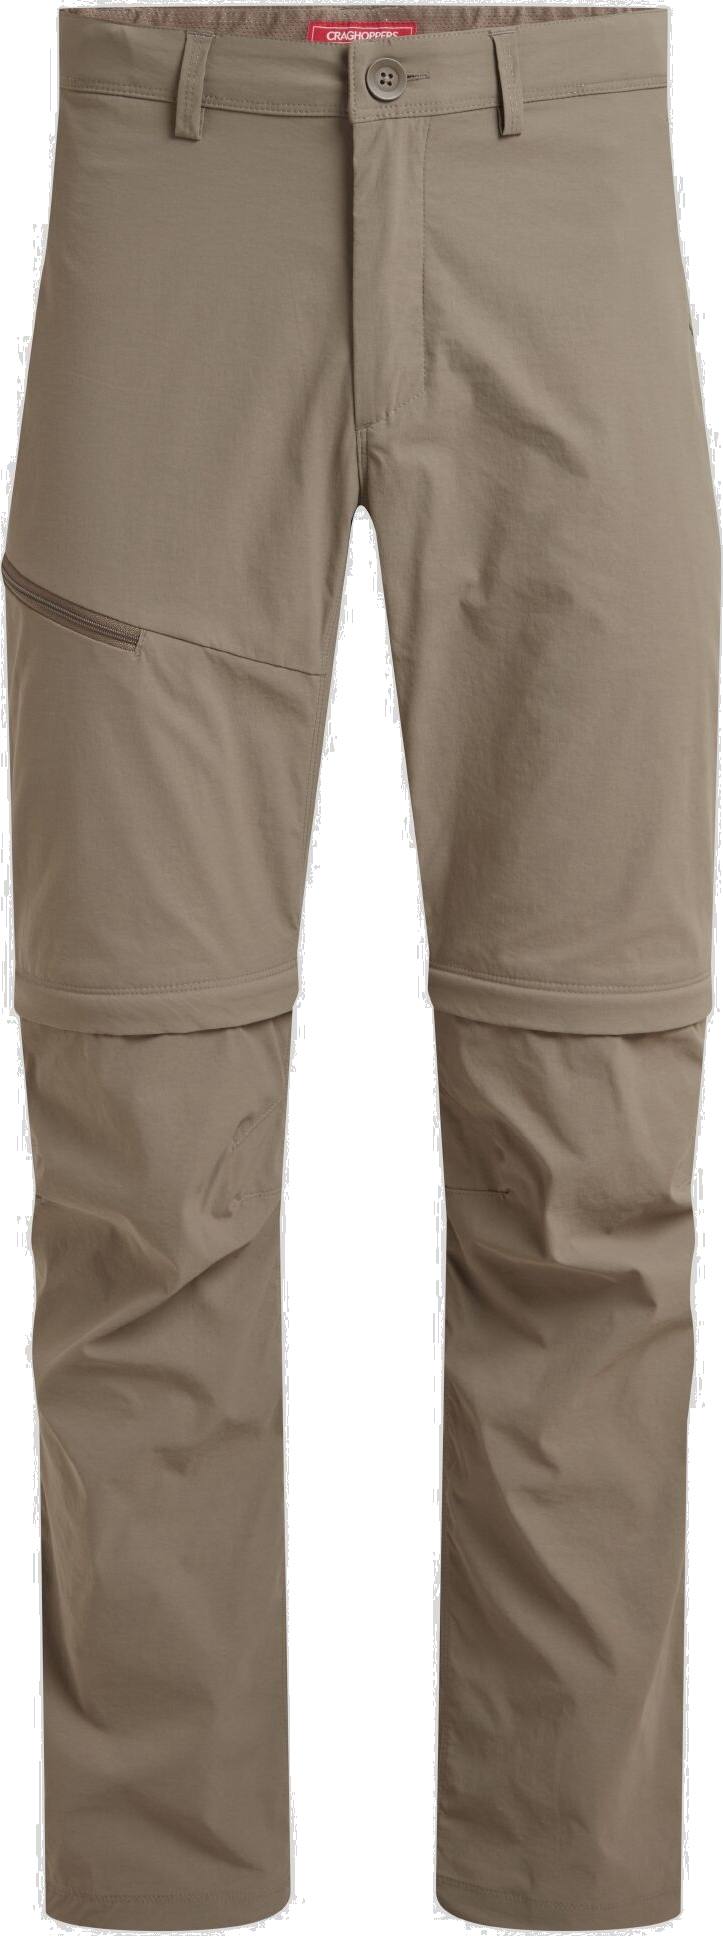 Craghoppers Men’s Nosilife Pro Convertible III Trousers